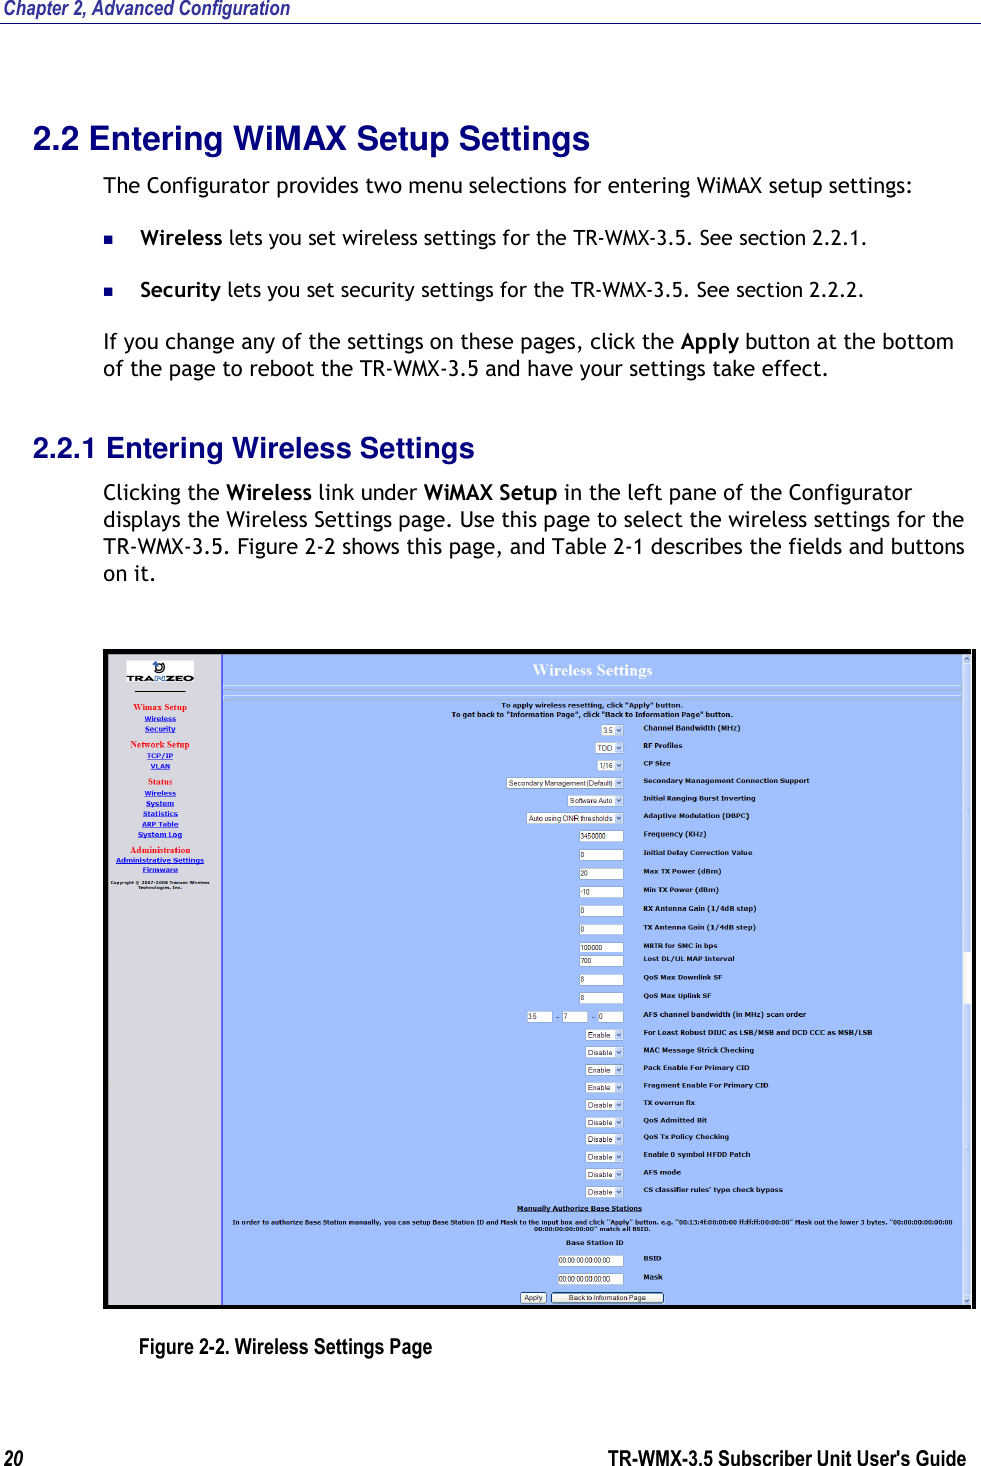 Chapter 2, Advanced Configuration 20                      TR-WMX-3.5 Subscriber Unit User&apos;s Guide  2.2 Entering WiMAX Setup Settings The Configurator provides two menu selections for entering WiMAX setup settings:  Wireless lets you set wireless settings for the TR-WMX-3.5. See section 2.2.1.  Security lets you set security settings for the TR-WMX-3.5. See section 2.2.2. If you change any of the settings on these pages, click the Apply button at the bottom of the page to reboot the TR-WMX-3.5 and have your settings take effect. 2.2.1 Entering Wireless Settings Clicking the Wireless link under WiMAX Setup in the left pane of the Configurator displays the Wireless Settings page. Use this page to select the wireless settings for the TR-WMX-3.5. Figure 2-2 shows this page, and Table 2-1 describes the fields and buttons on it.   Figure 2-2. Wireless Settings Page 